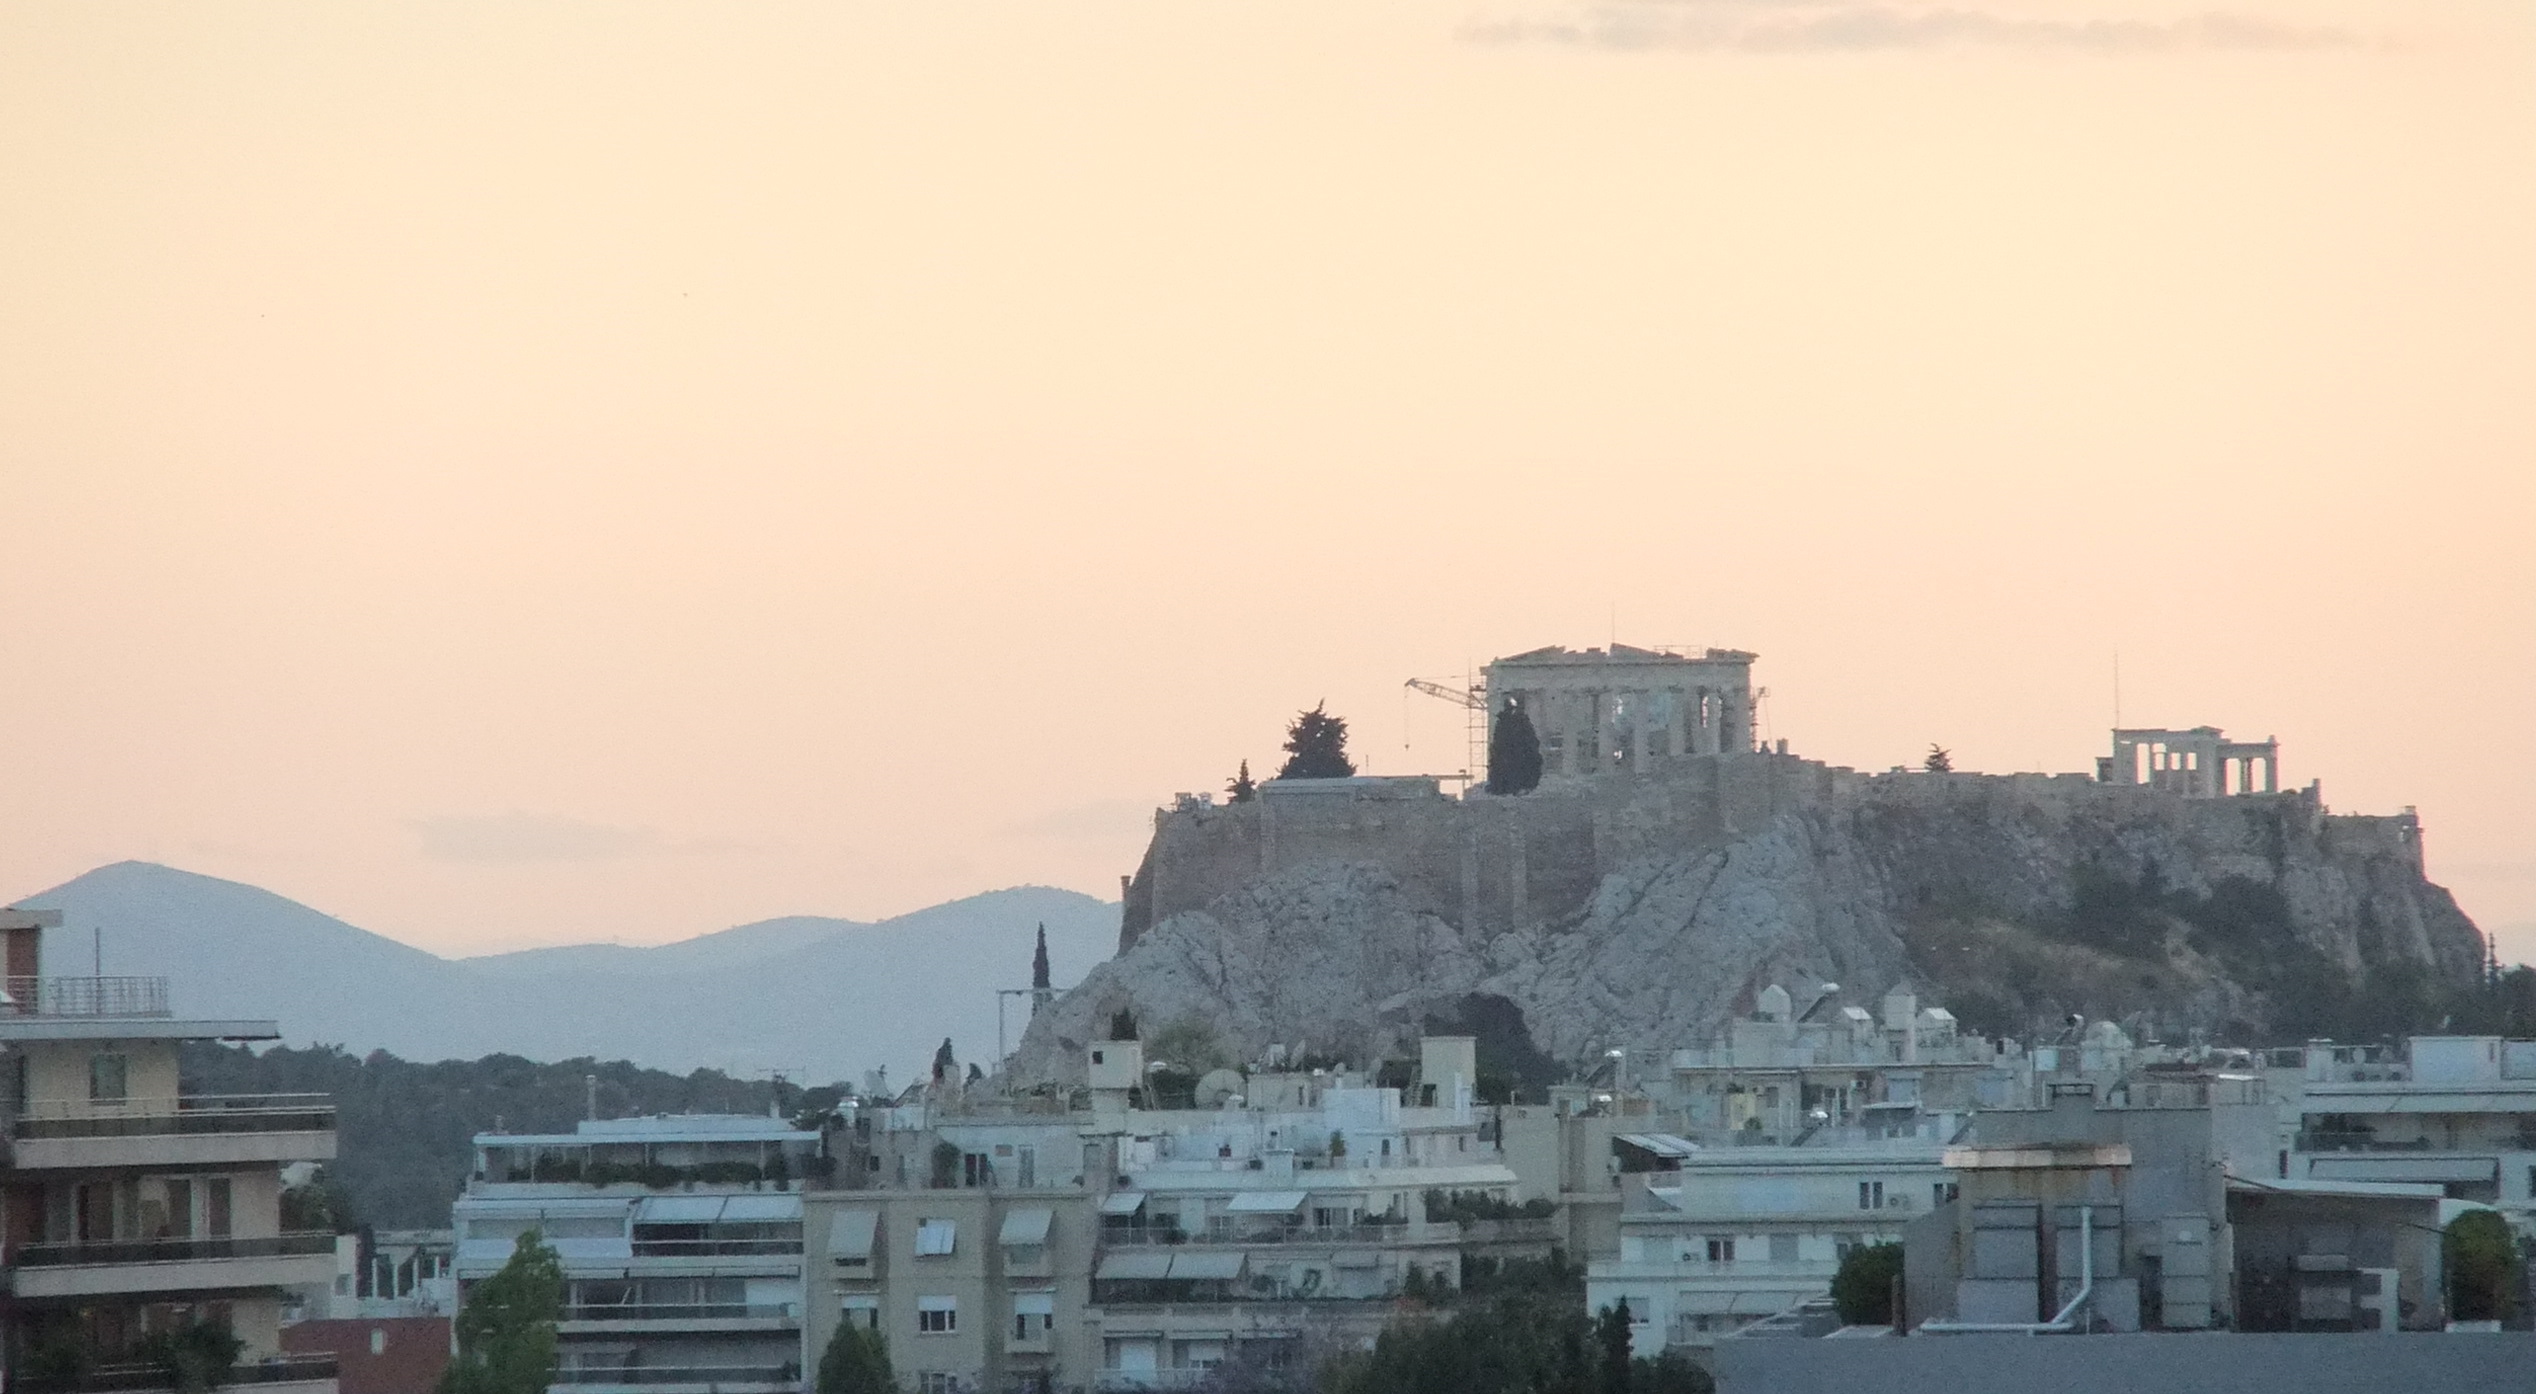 A photograph of the ancient temple on the hill above the city of Athens